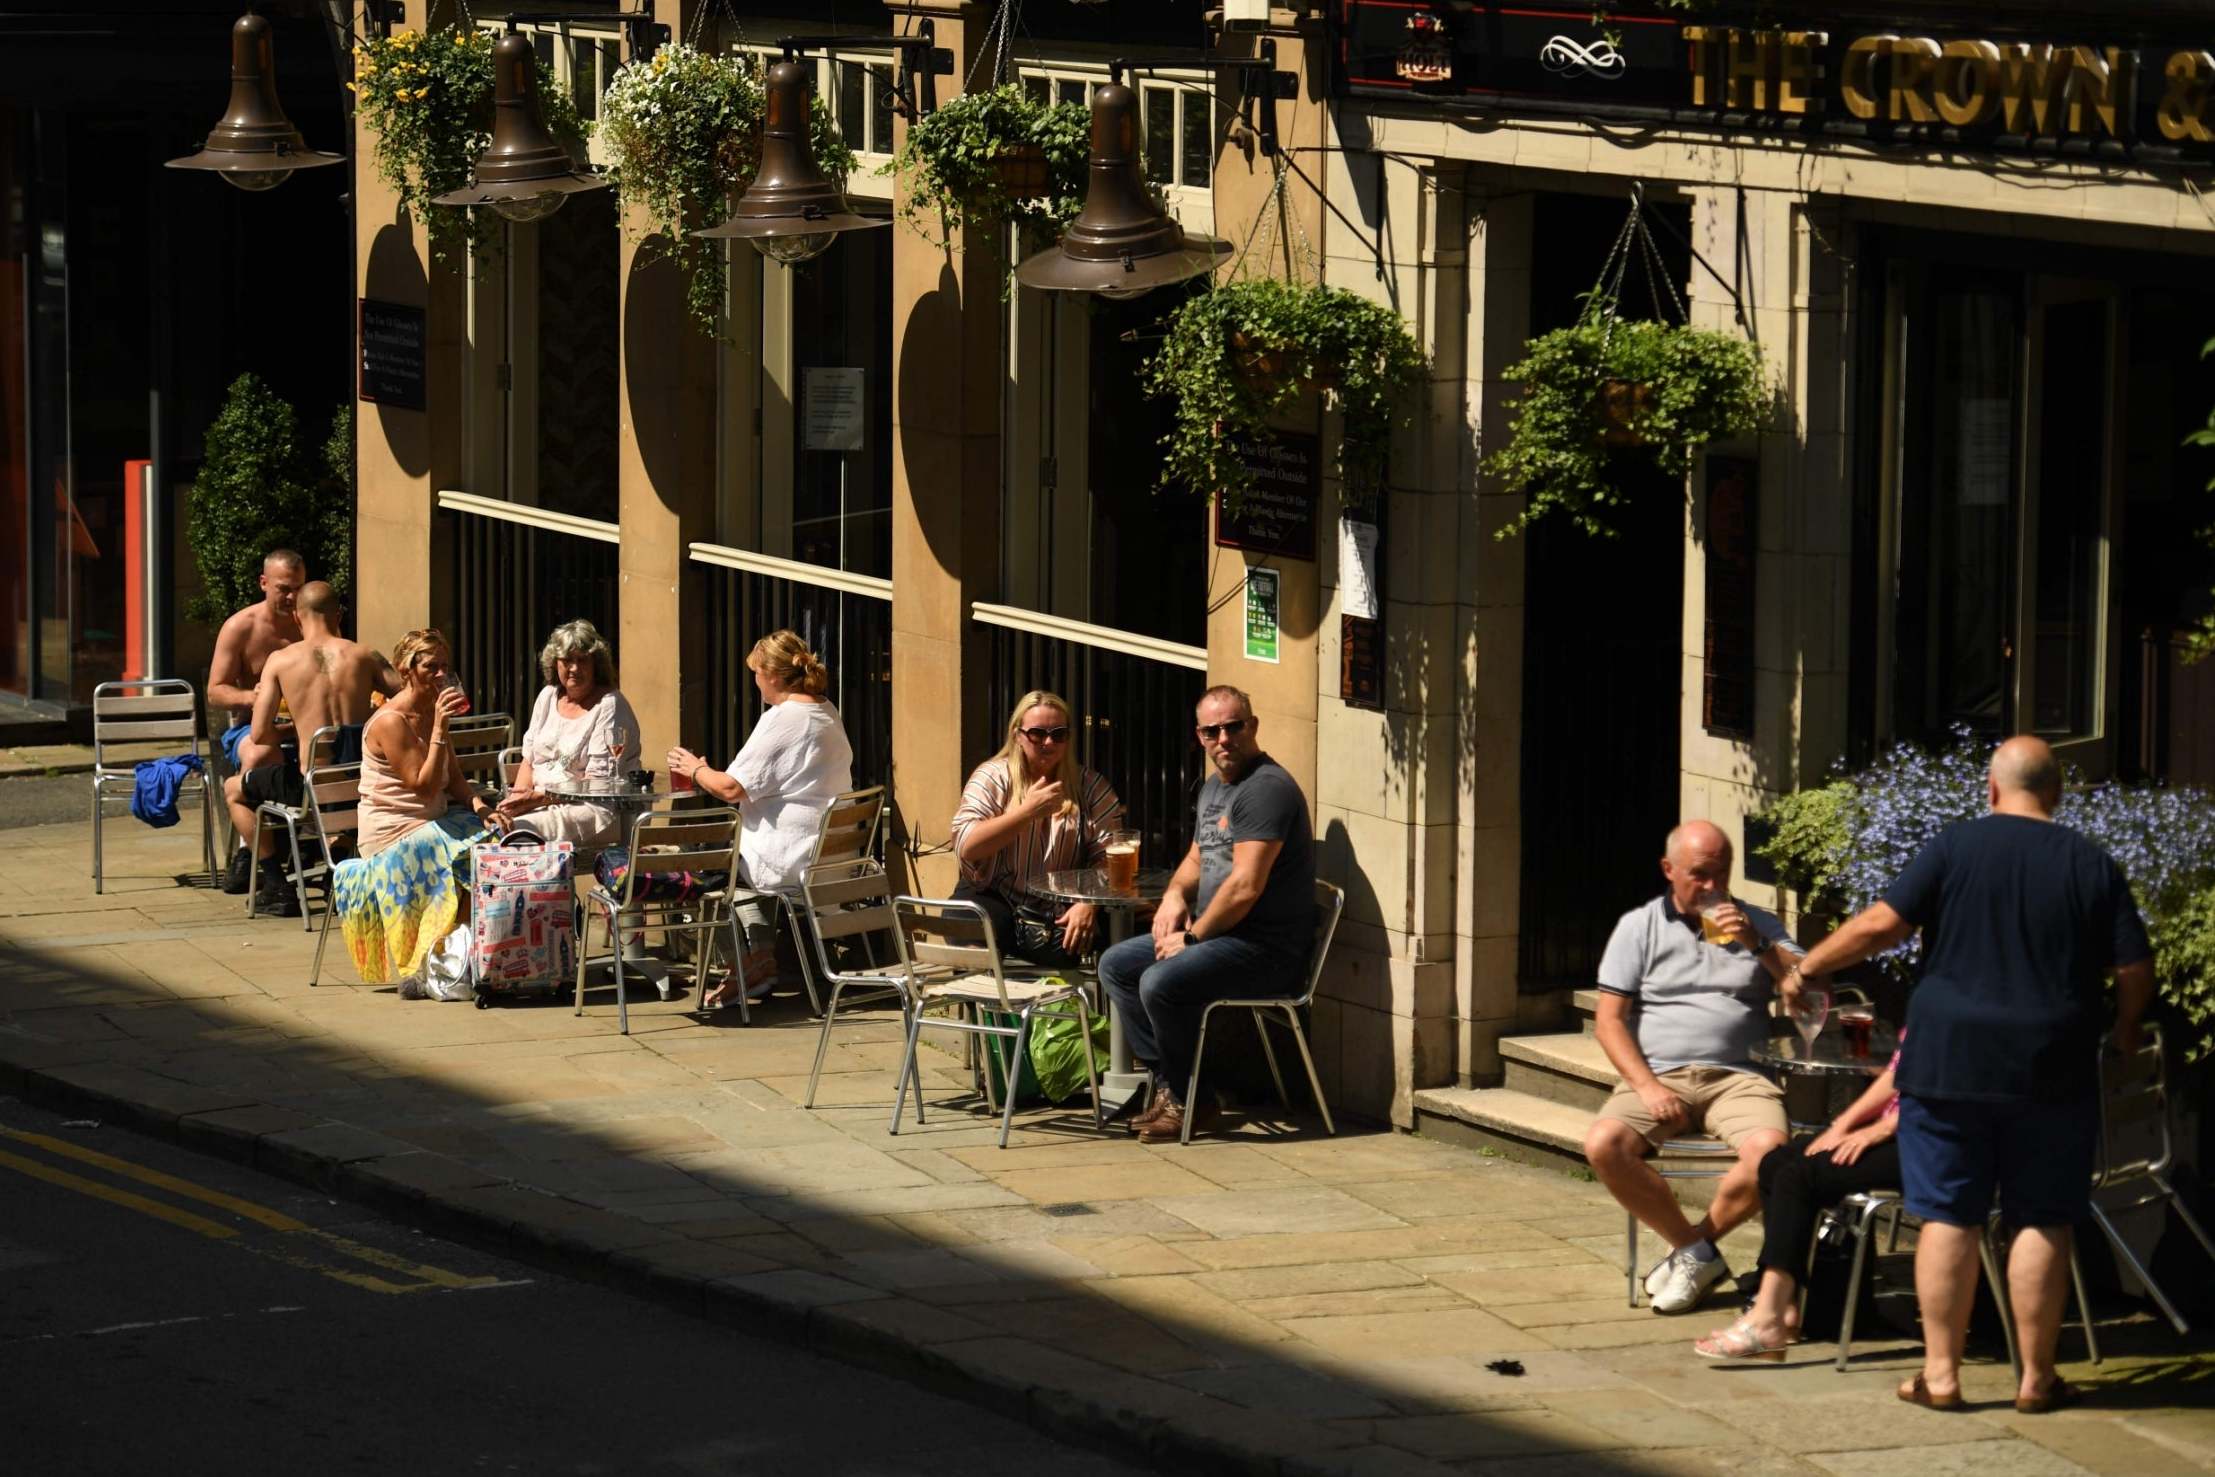 Manchester pub-goers enjoy a drink in the sun